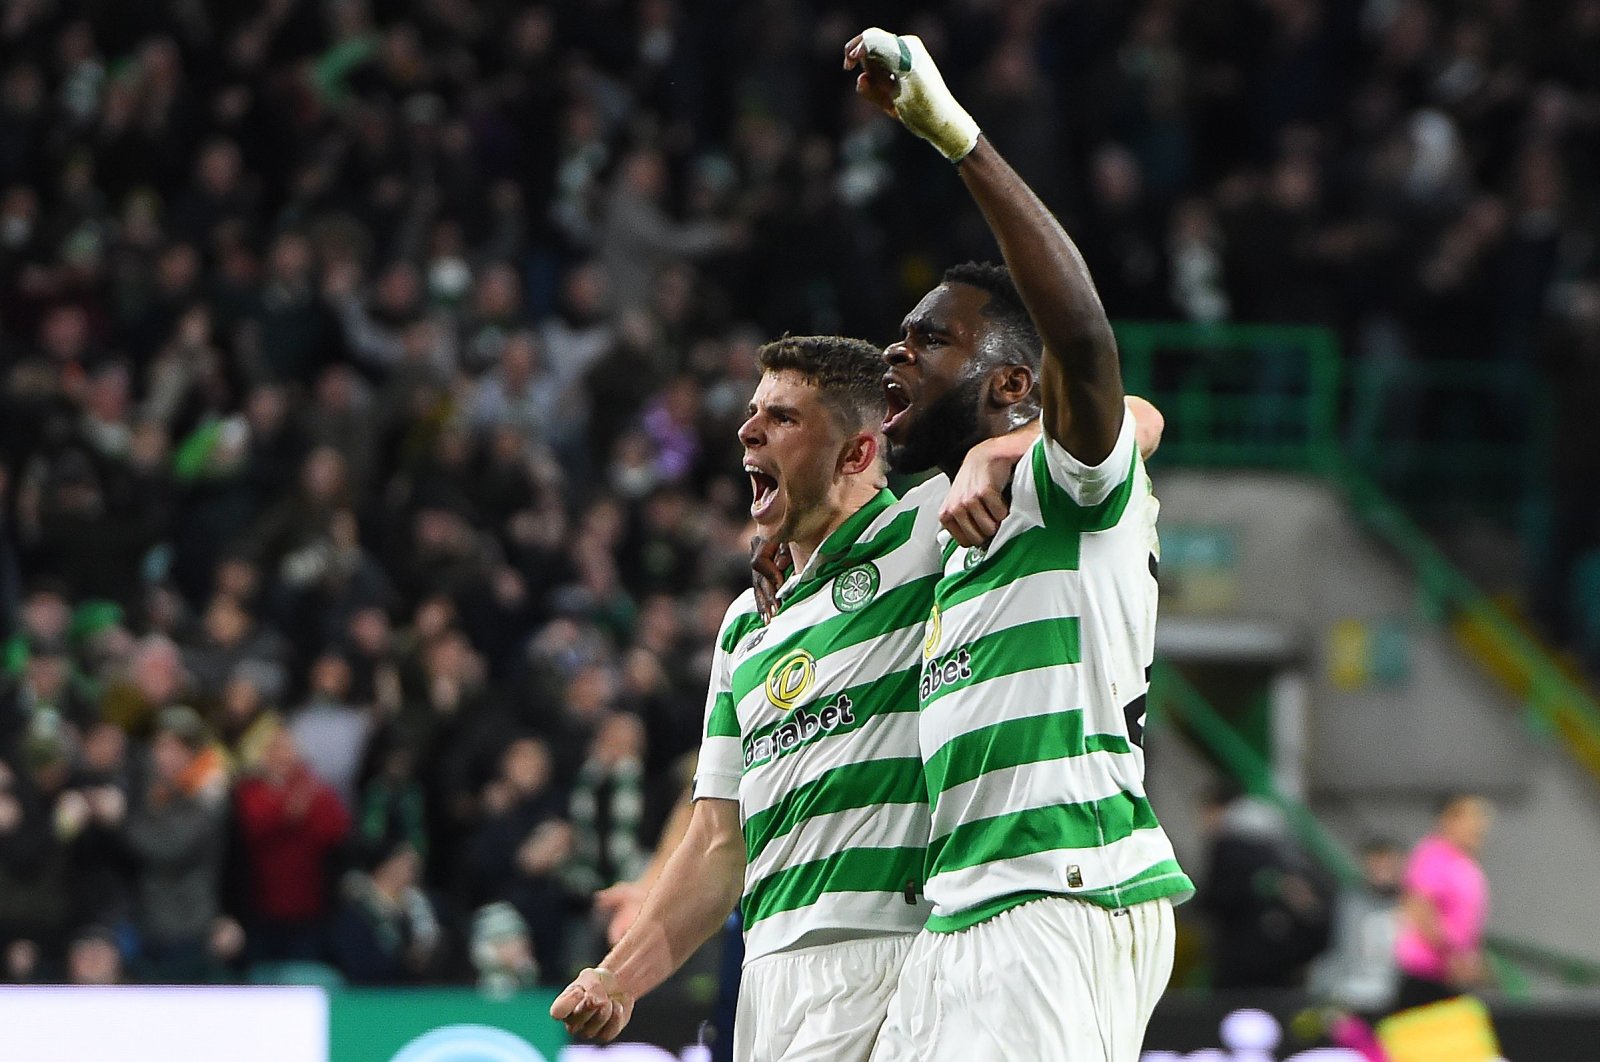 Celtic's midfielder Ryan Christie (L) celebrates scoring the equalizing goal with forward Odsonne Edouard during a match between Celtic and Lazio, in Glasgow, Scotland, Oct. 24, 2019. (AFP Photo)